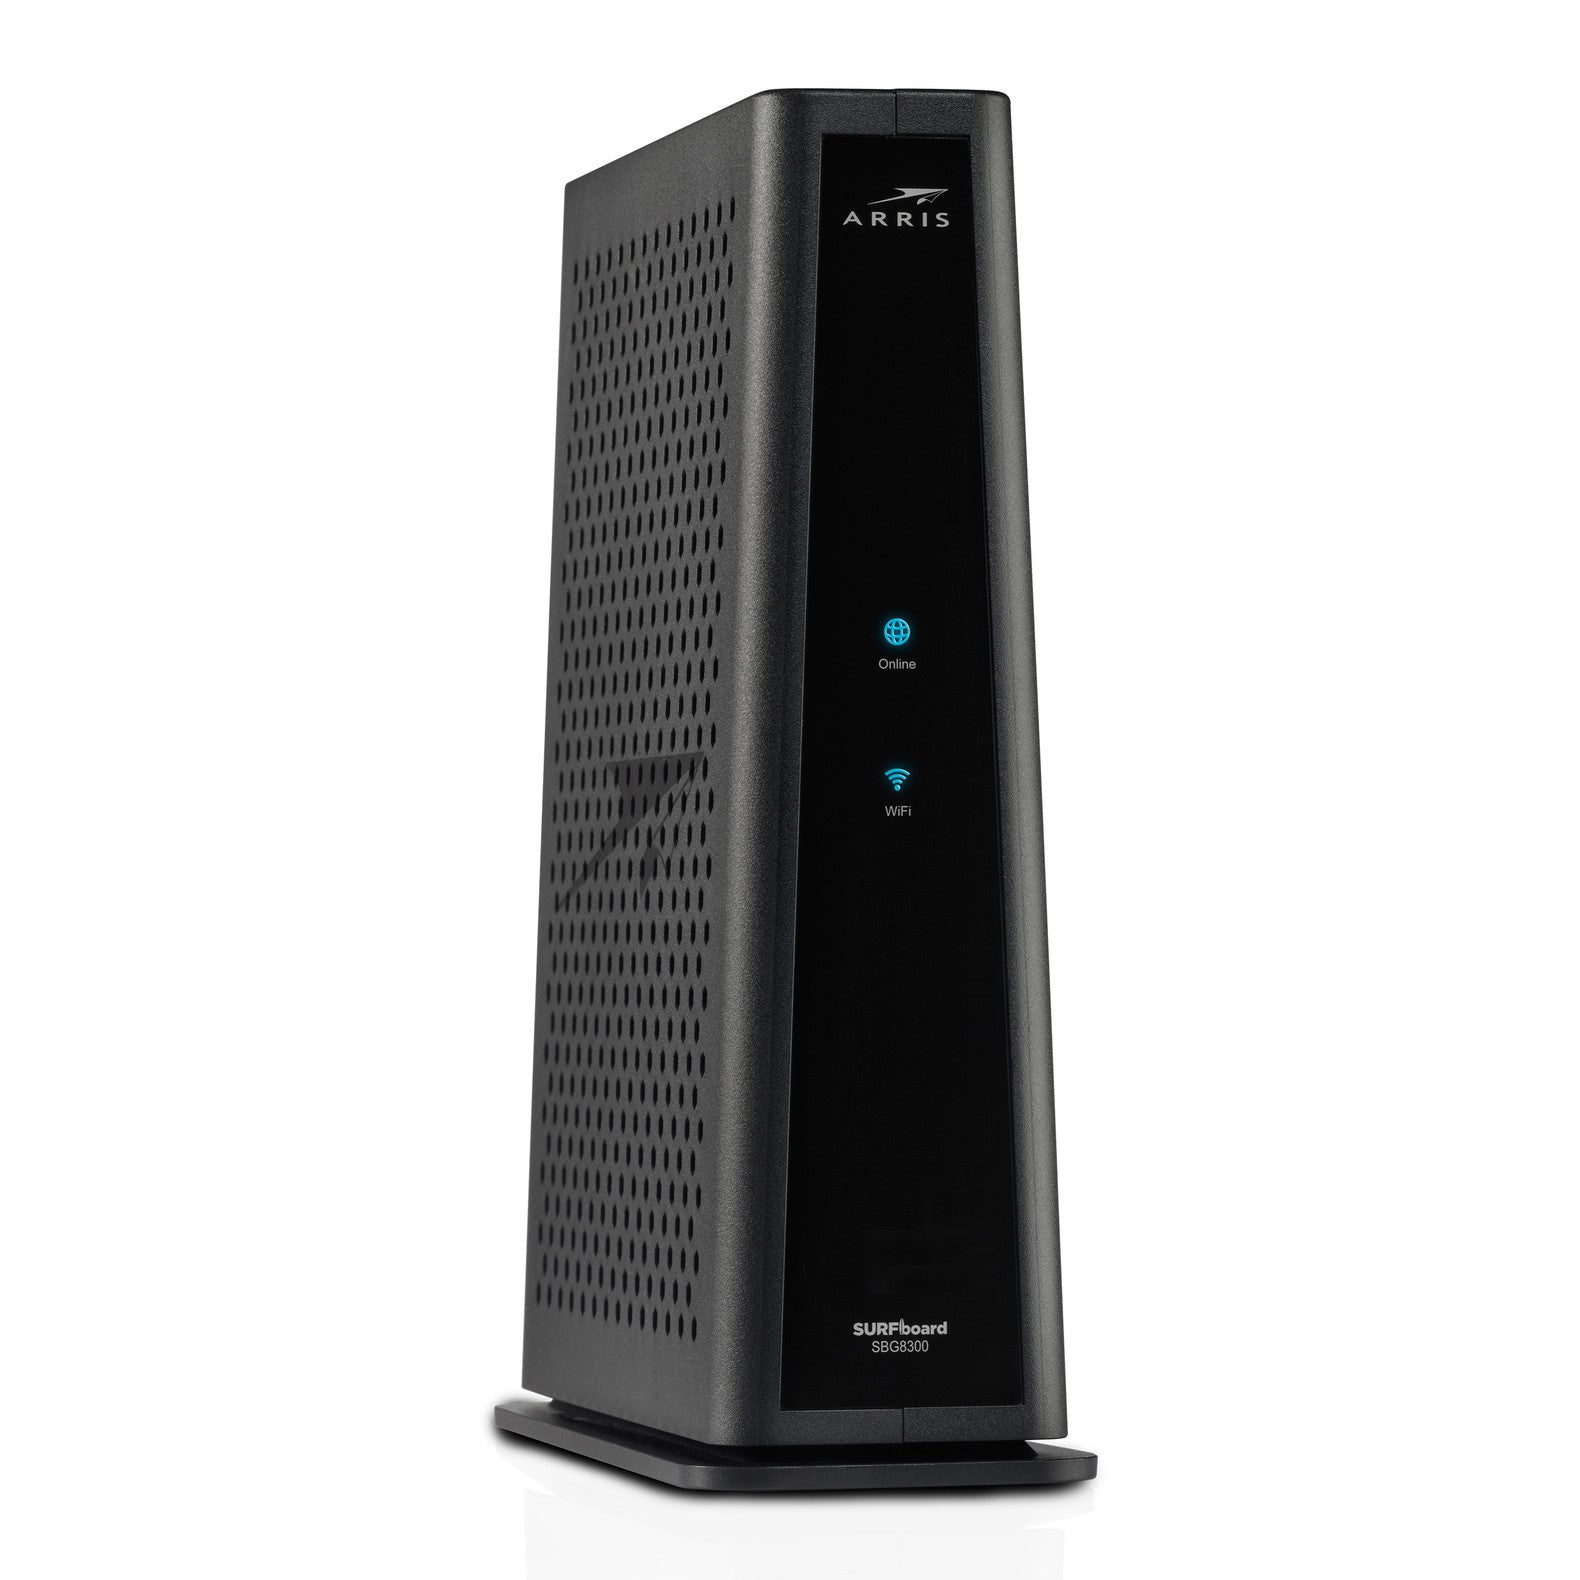 Arris SBG8300-RB Surfboard DOCSIS 3.1 Gigabit Cable Modem & AC2350 Wi-Fi Router - Certified Refurbished